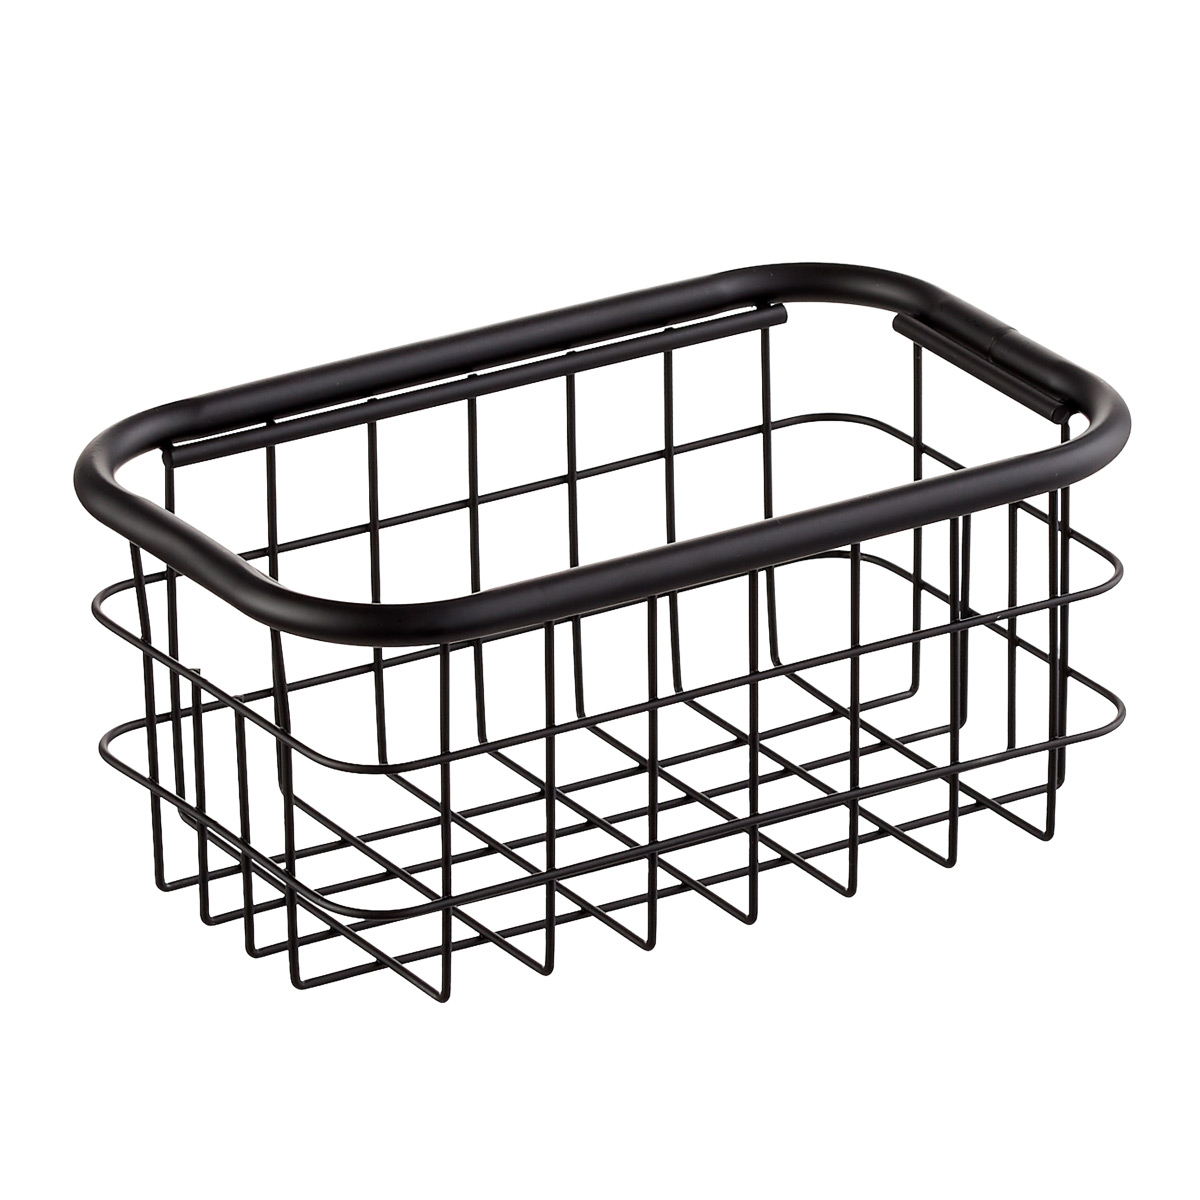 https://www.containerstore.com/catalogimages/381000/10079451-urban-stackable-basket-smal.jpg